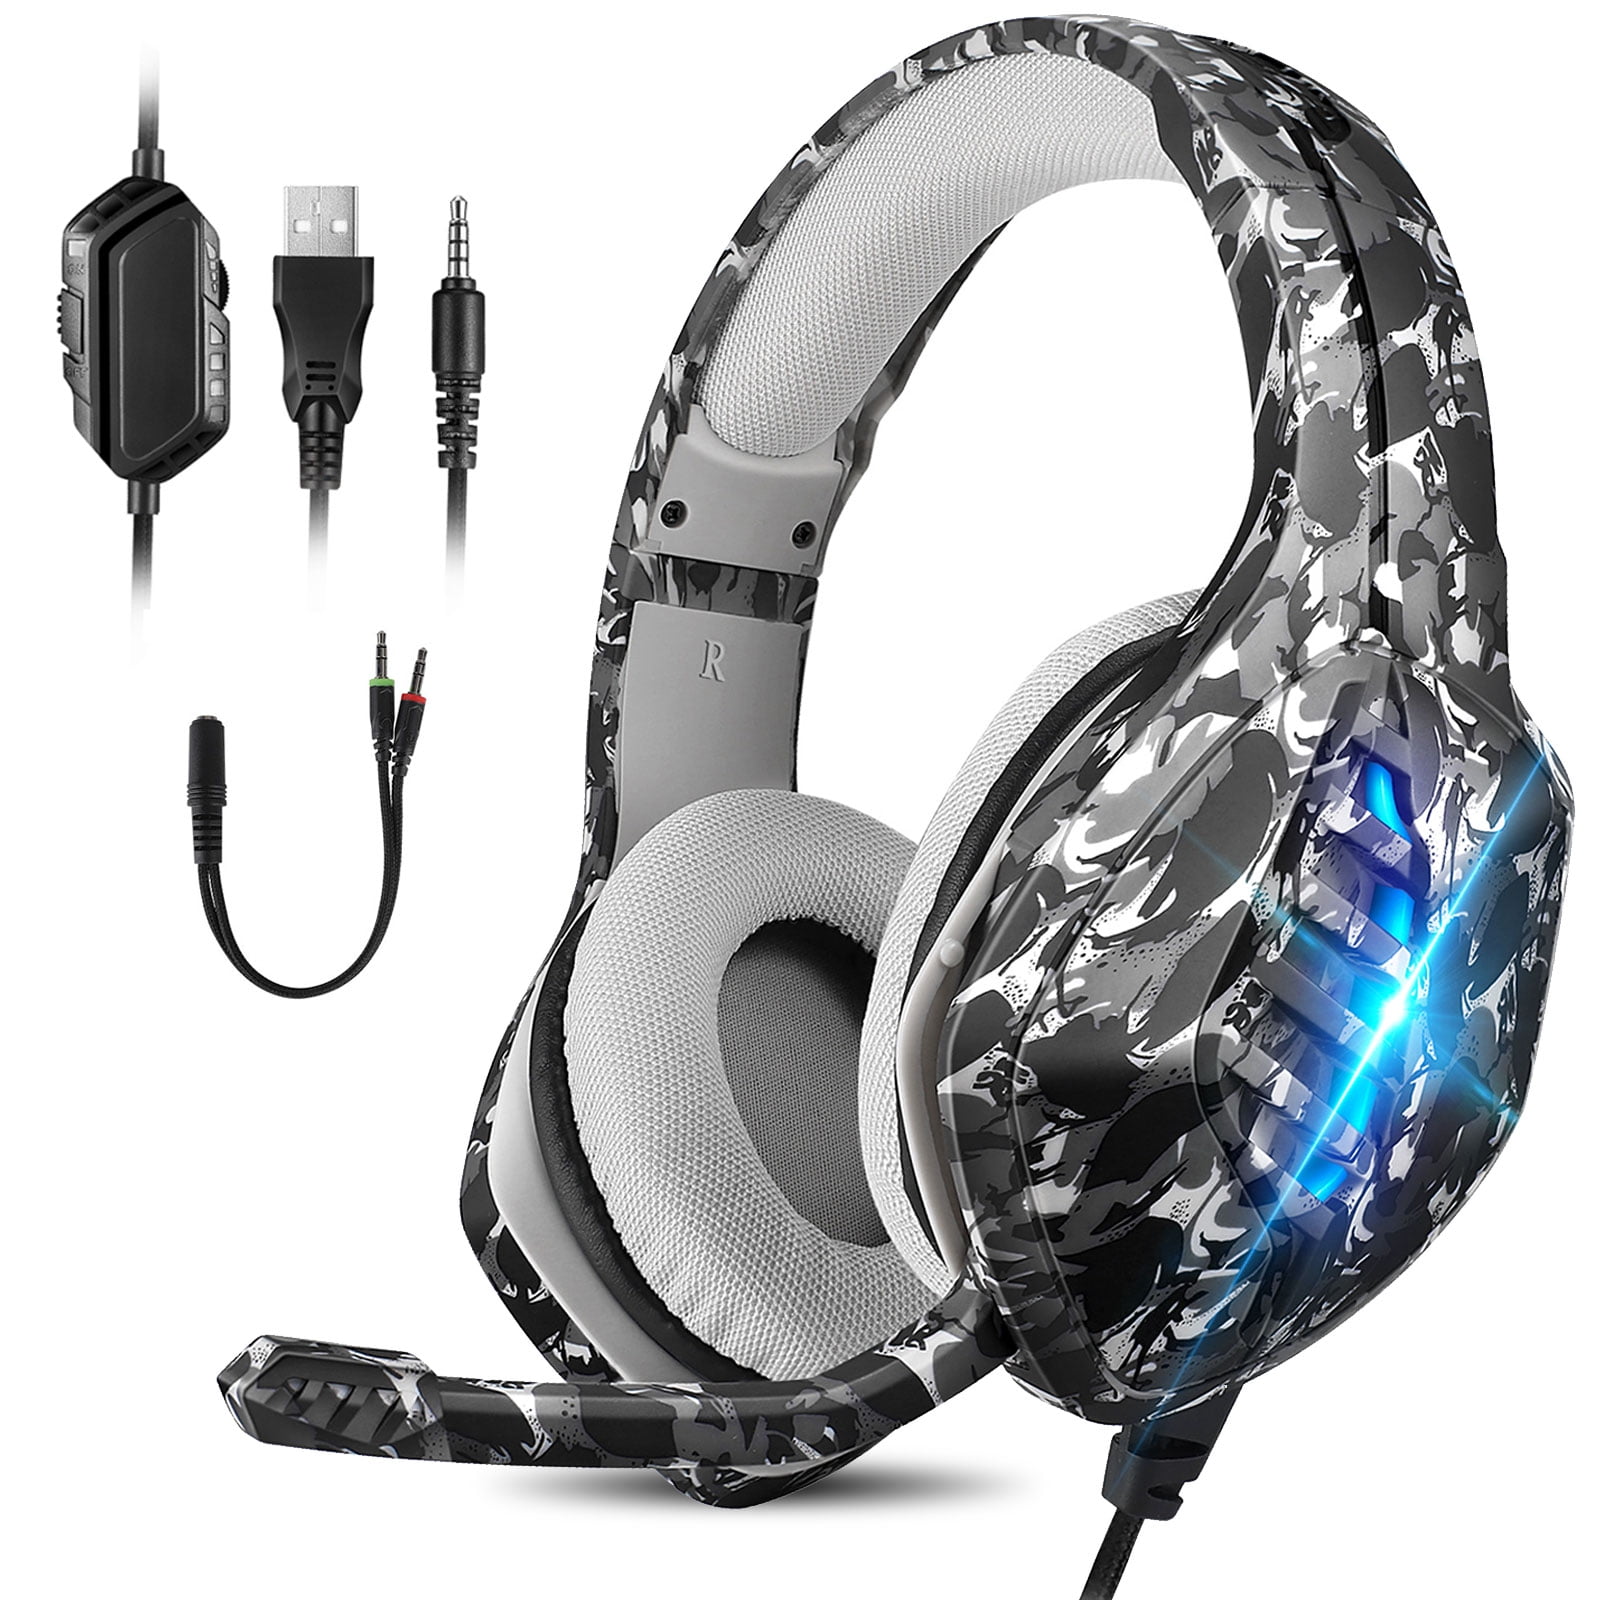 Gaming Headset for PS4, PS5, Xbox One, Nintendo Switch, , Stereo Gaming Headphones with Noise Canceling Mic, Memory Earmuffs, LED Lights, 3.5mm Over